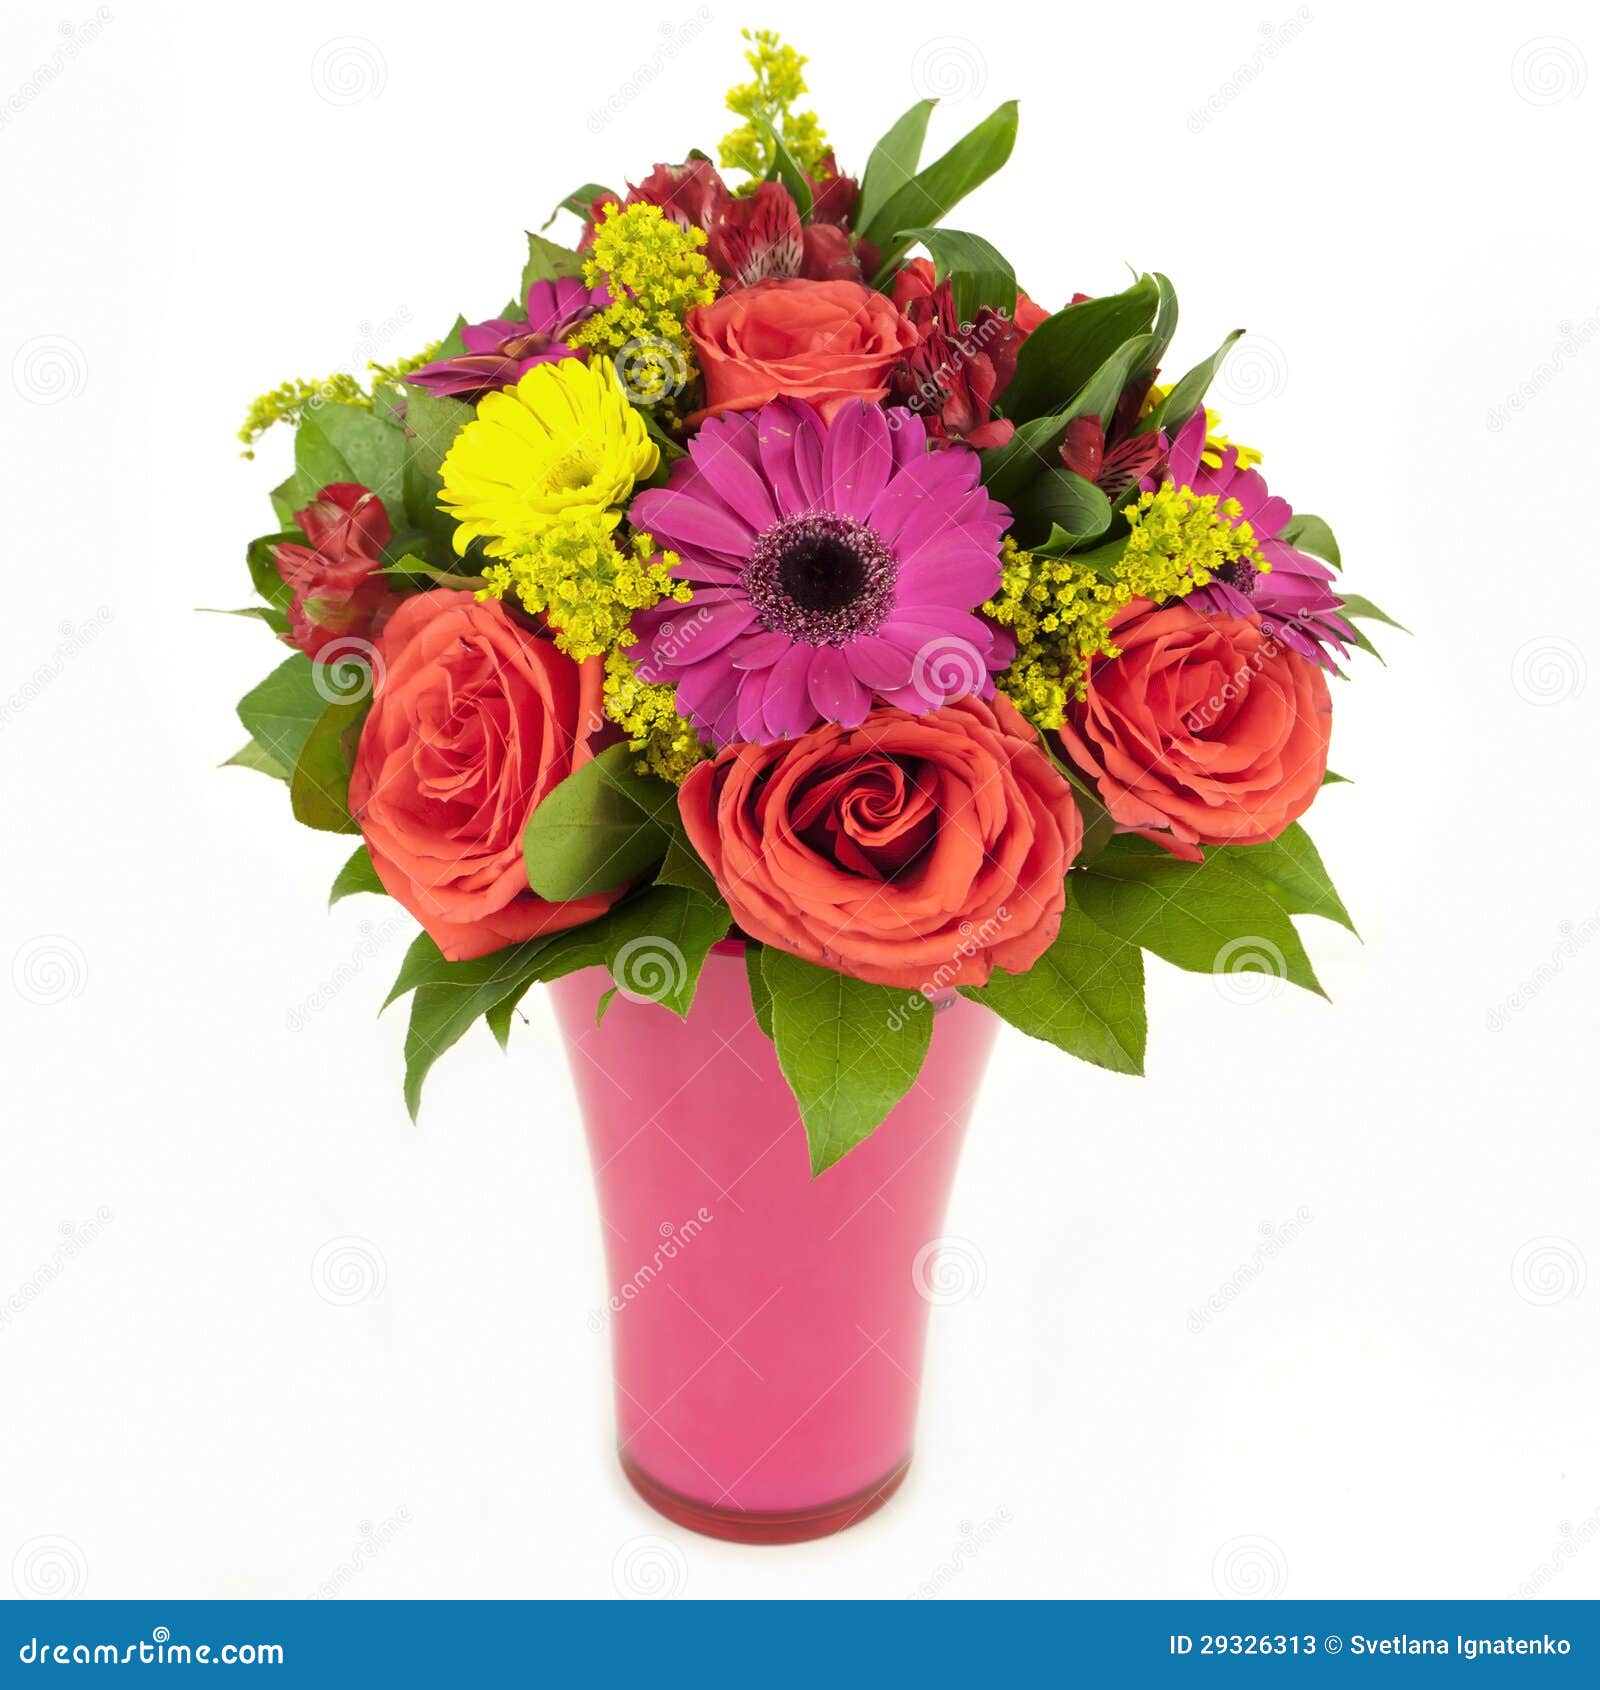 bouquet of pink and yellow flowers in vase  on white